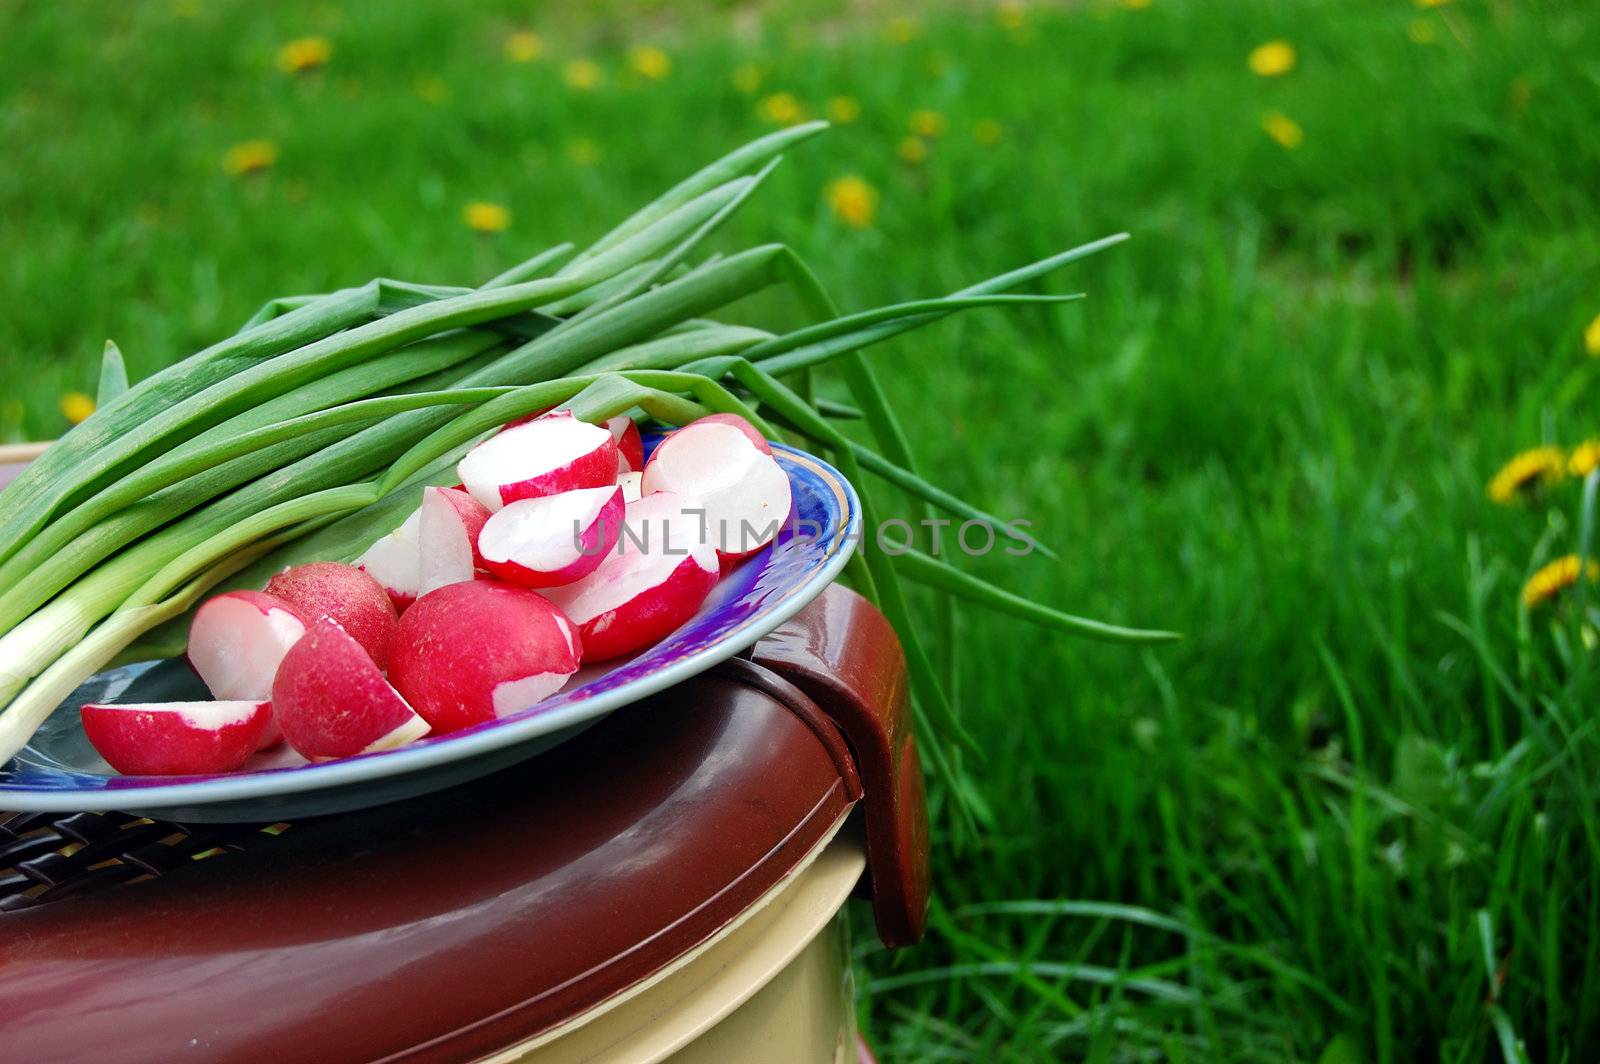 reddish and green onion, food basket on nature background